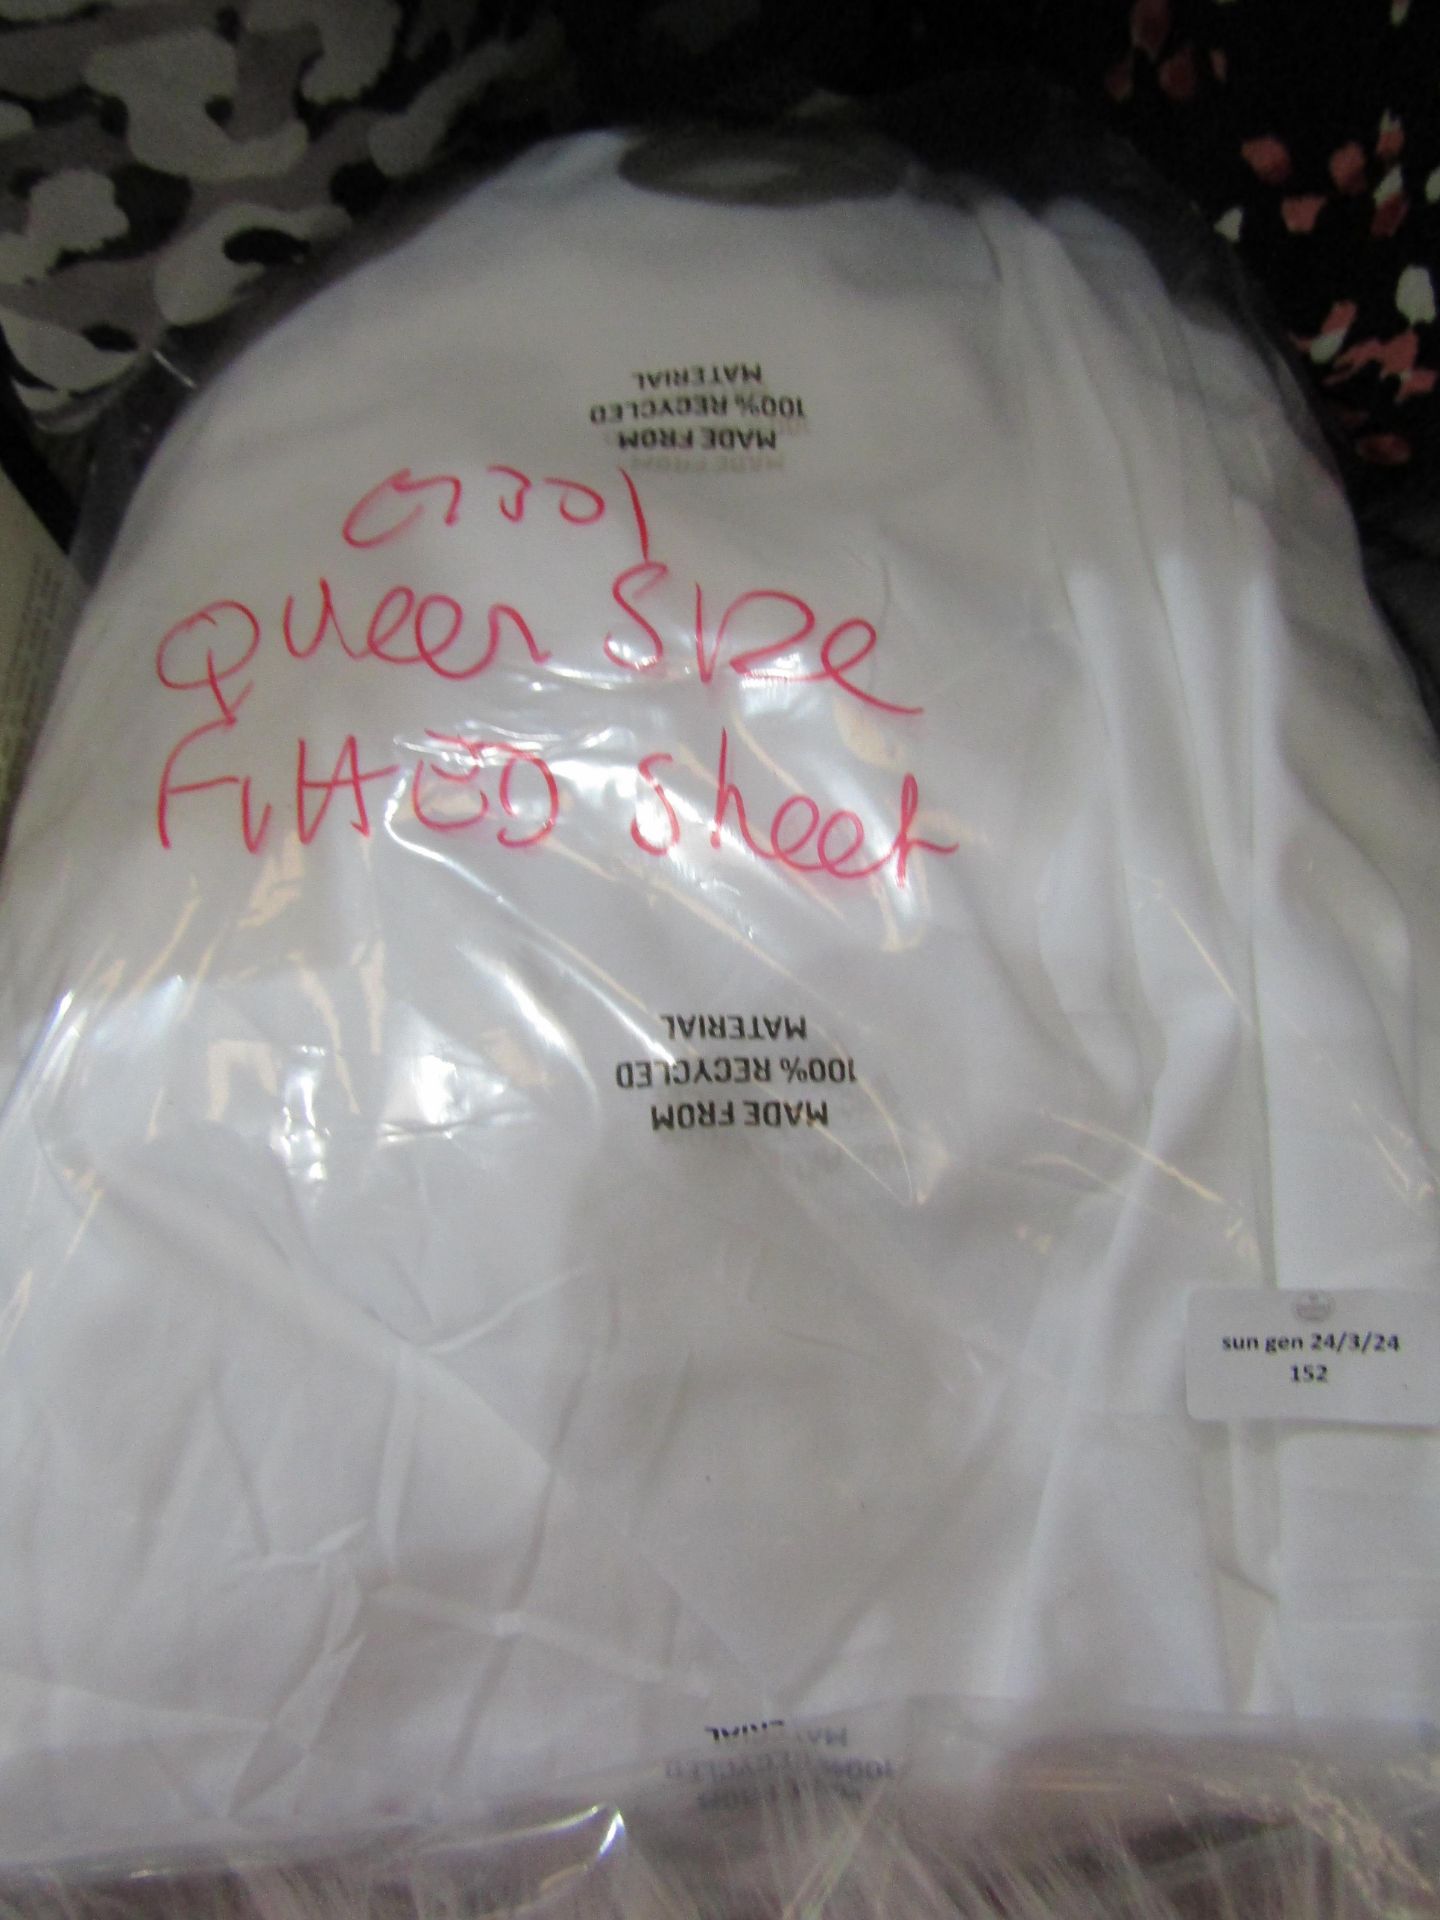 White Queen Sized Sheet - Good Condition & Packaged.